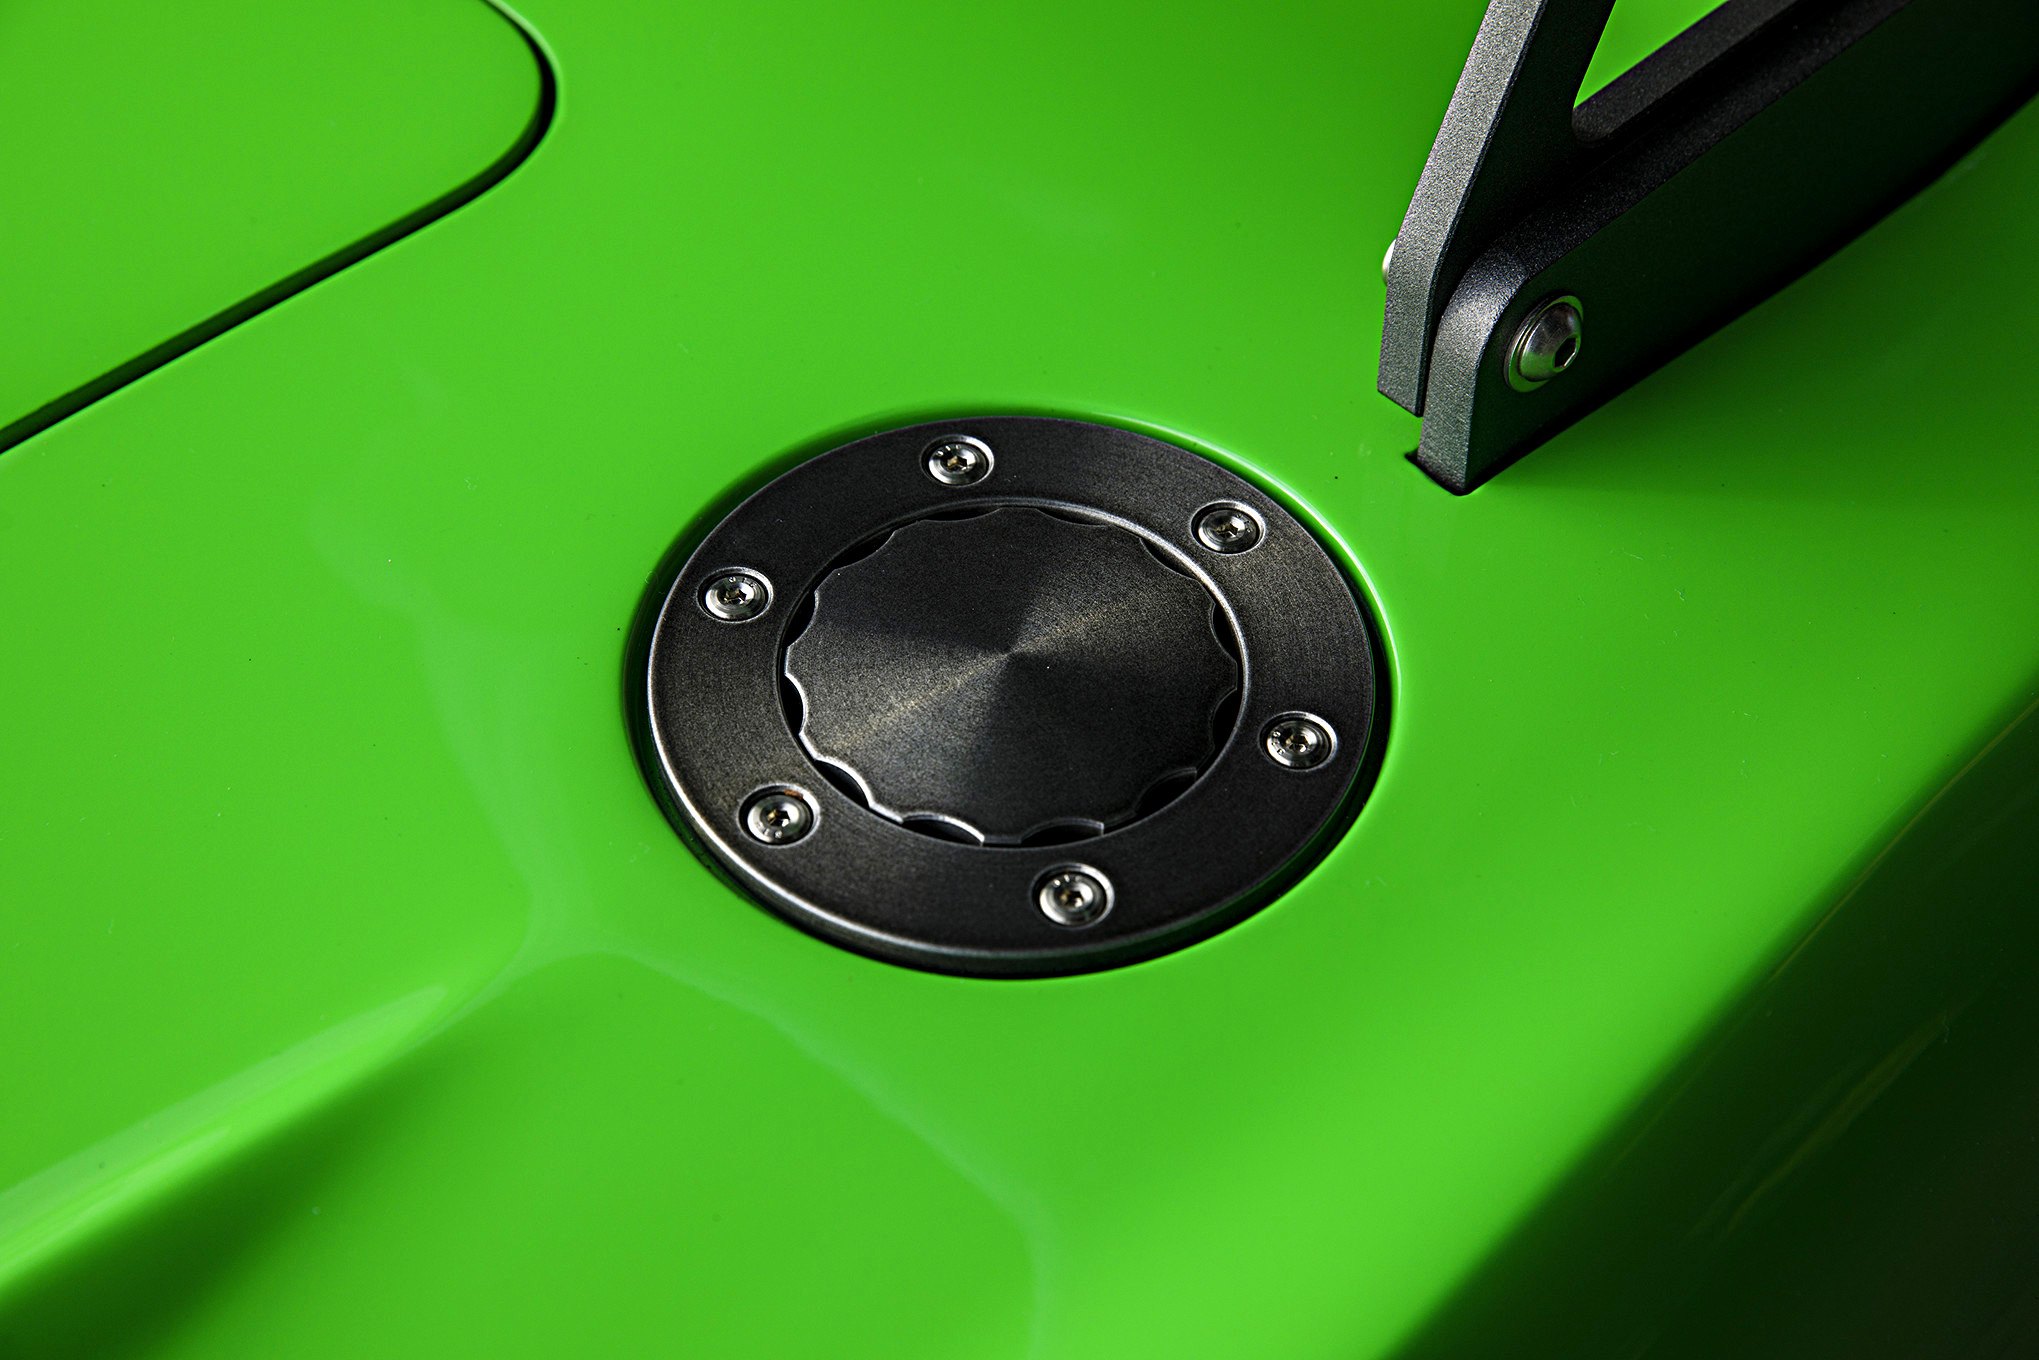 Chrome Gas Cap on Green Debadged Chevy Corvette - Photo by Robert McGaffin